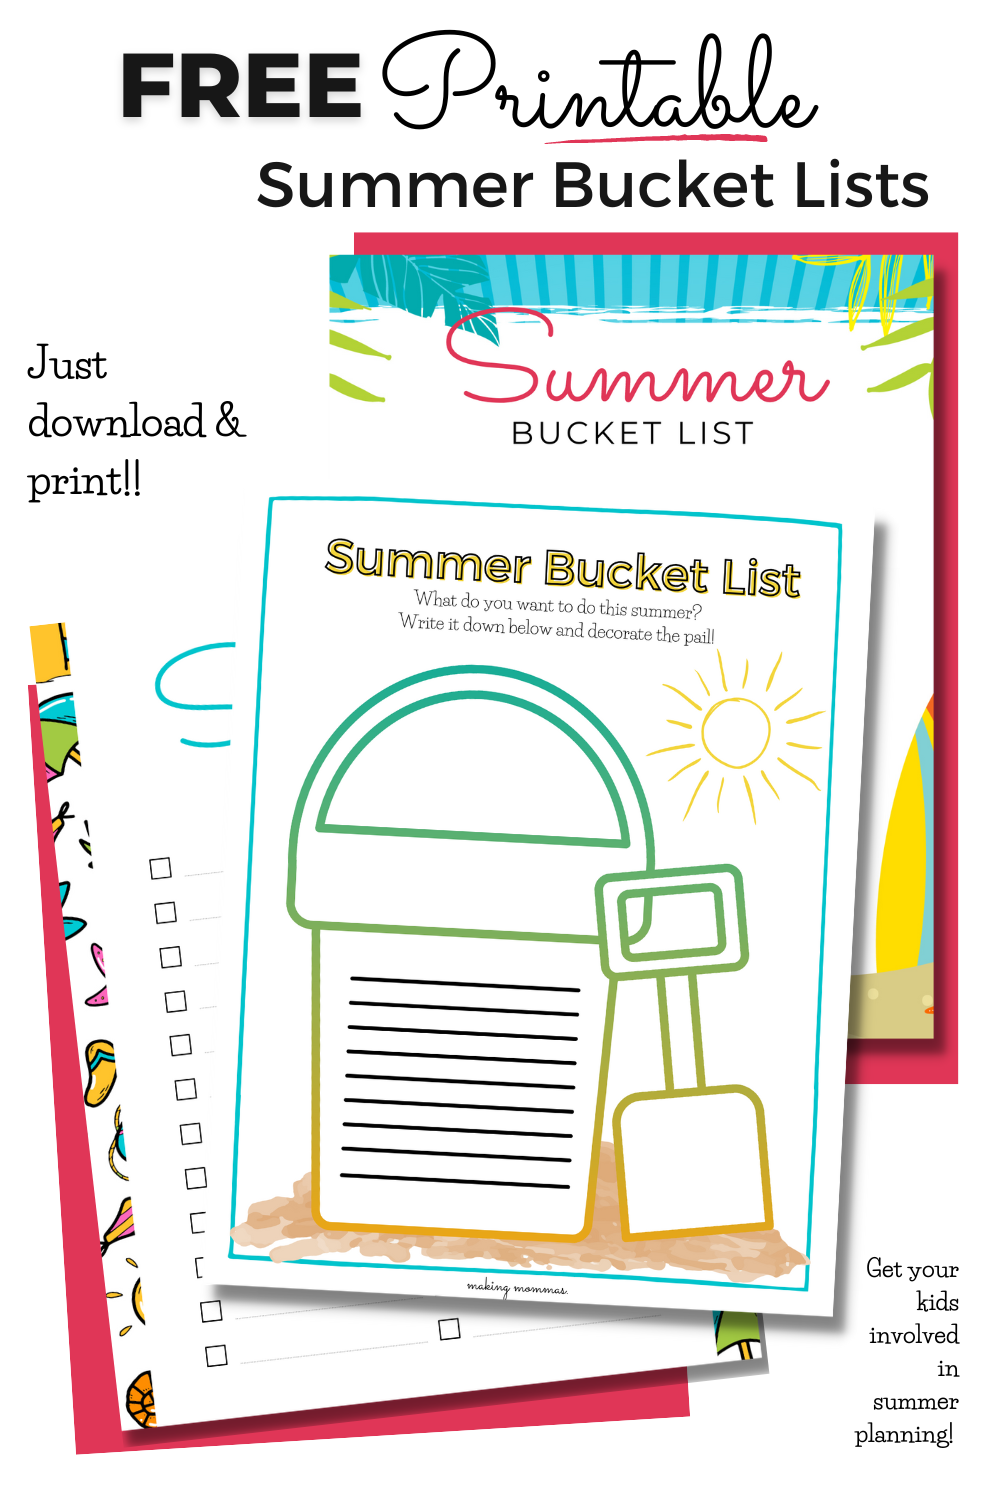 image of free summer printables